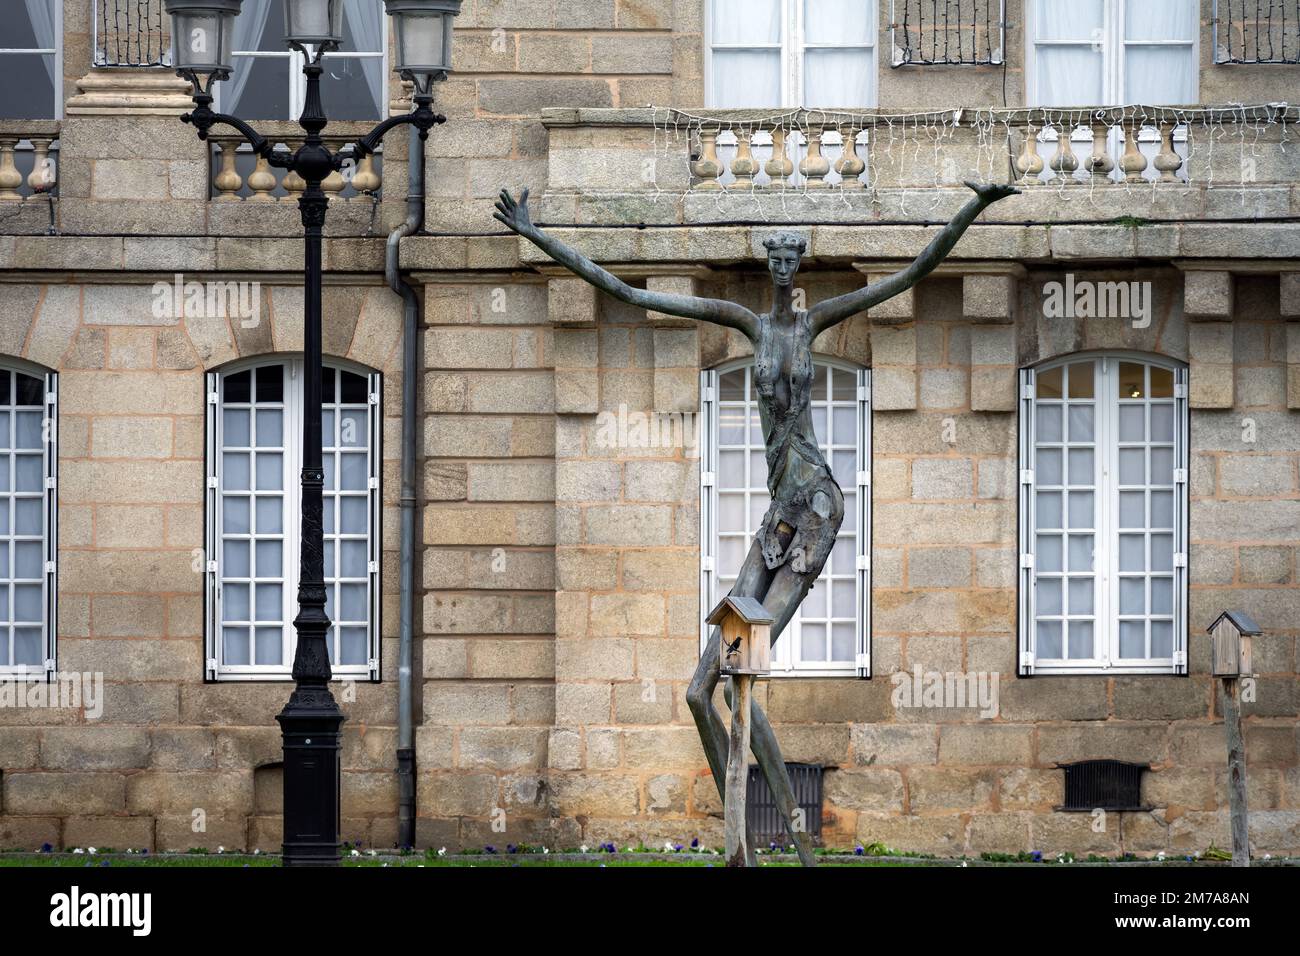 ALENCON, FRANCE - DECEMBER 28th, 2022: L'Amour, statue by Louis Derbré, in front of Alençon town hall, Normandy, France Stock Photo